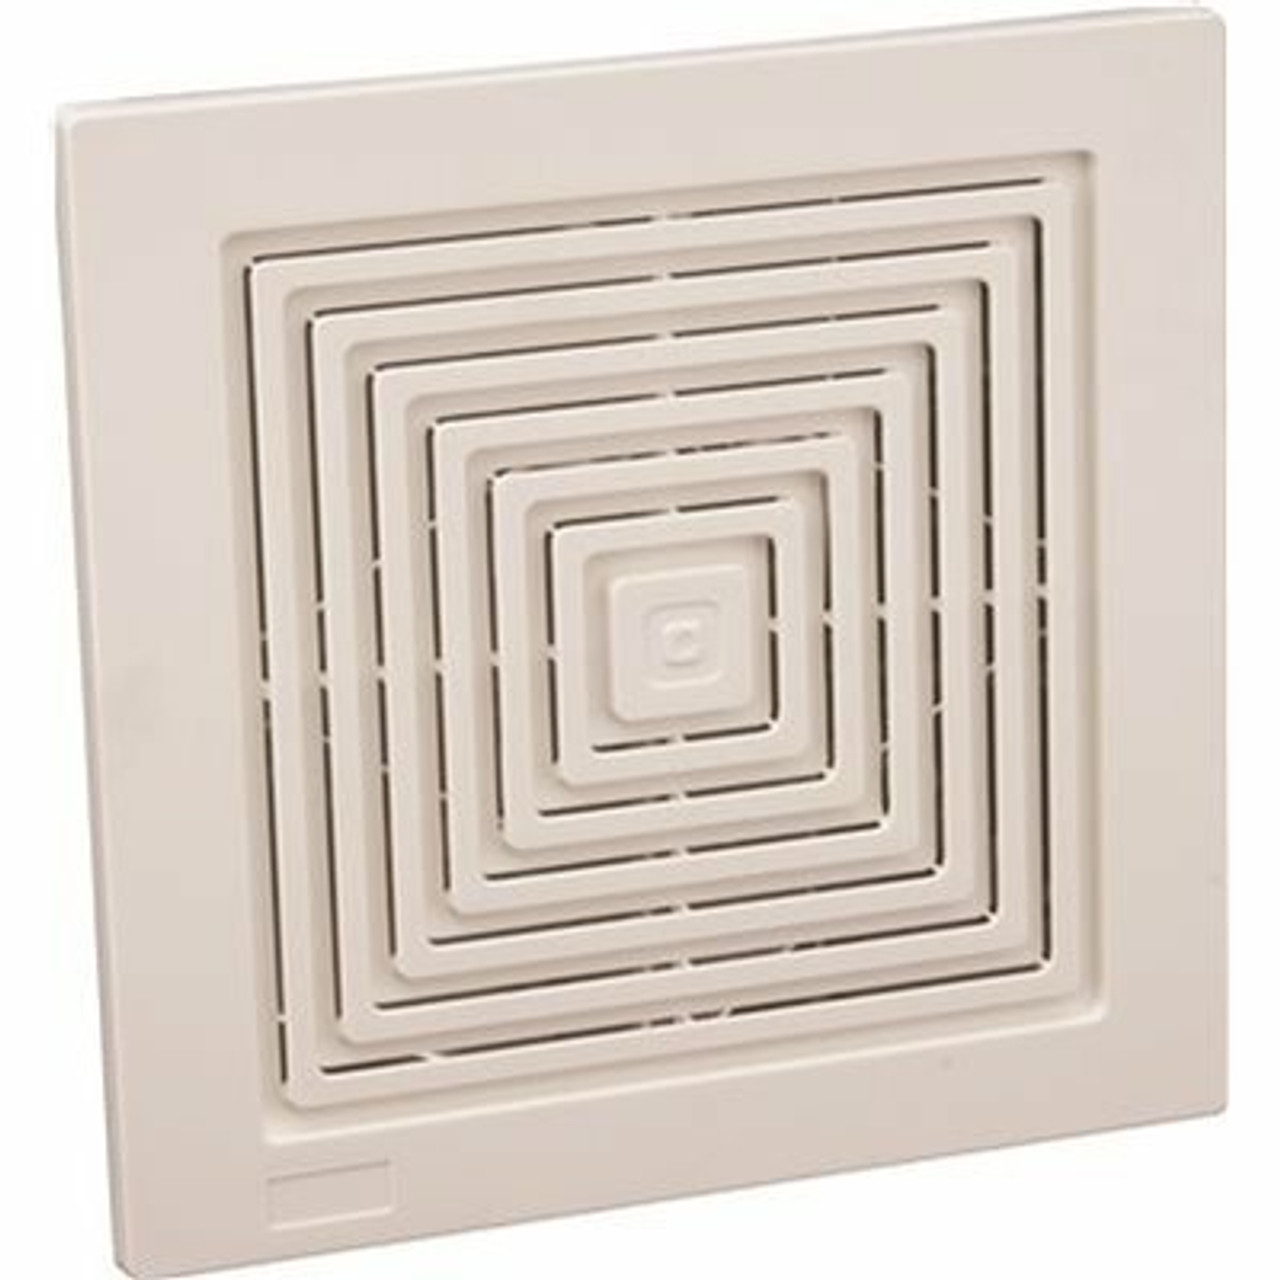 Broan-Nutone 9 In. X 9-1/4 In. Exhaust Fan Replacement Grille In White